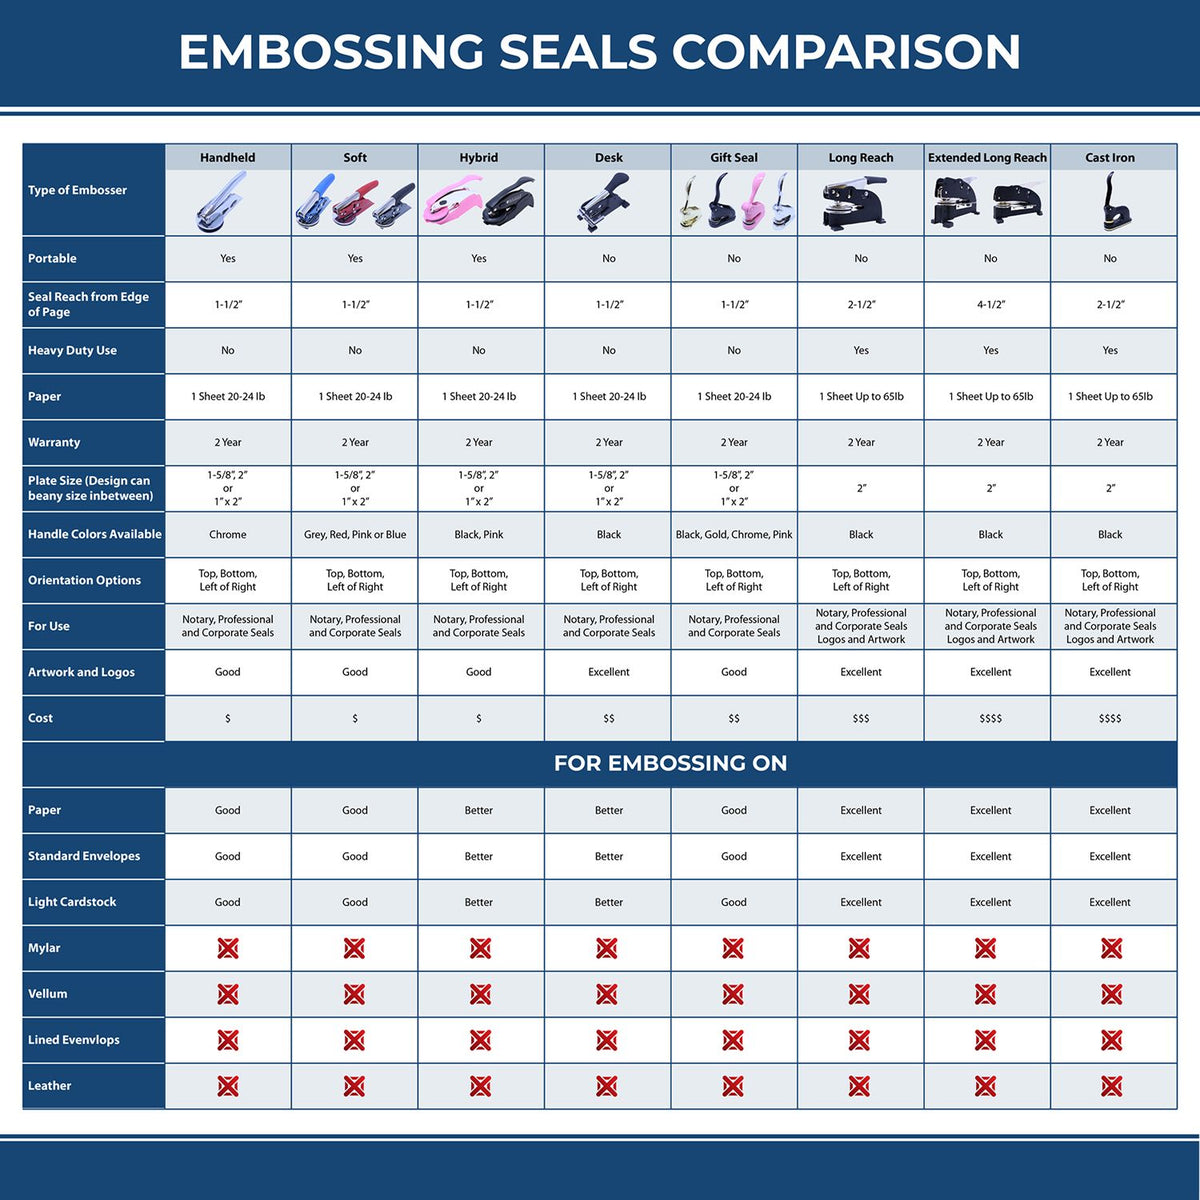 A comparison chart for the different types of mount models available for the Long Reach New Mexico PE Seal.